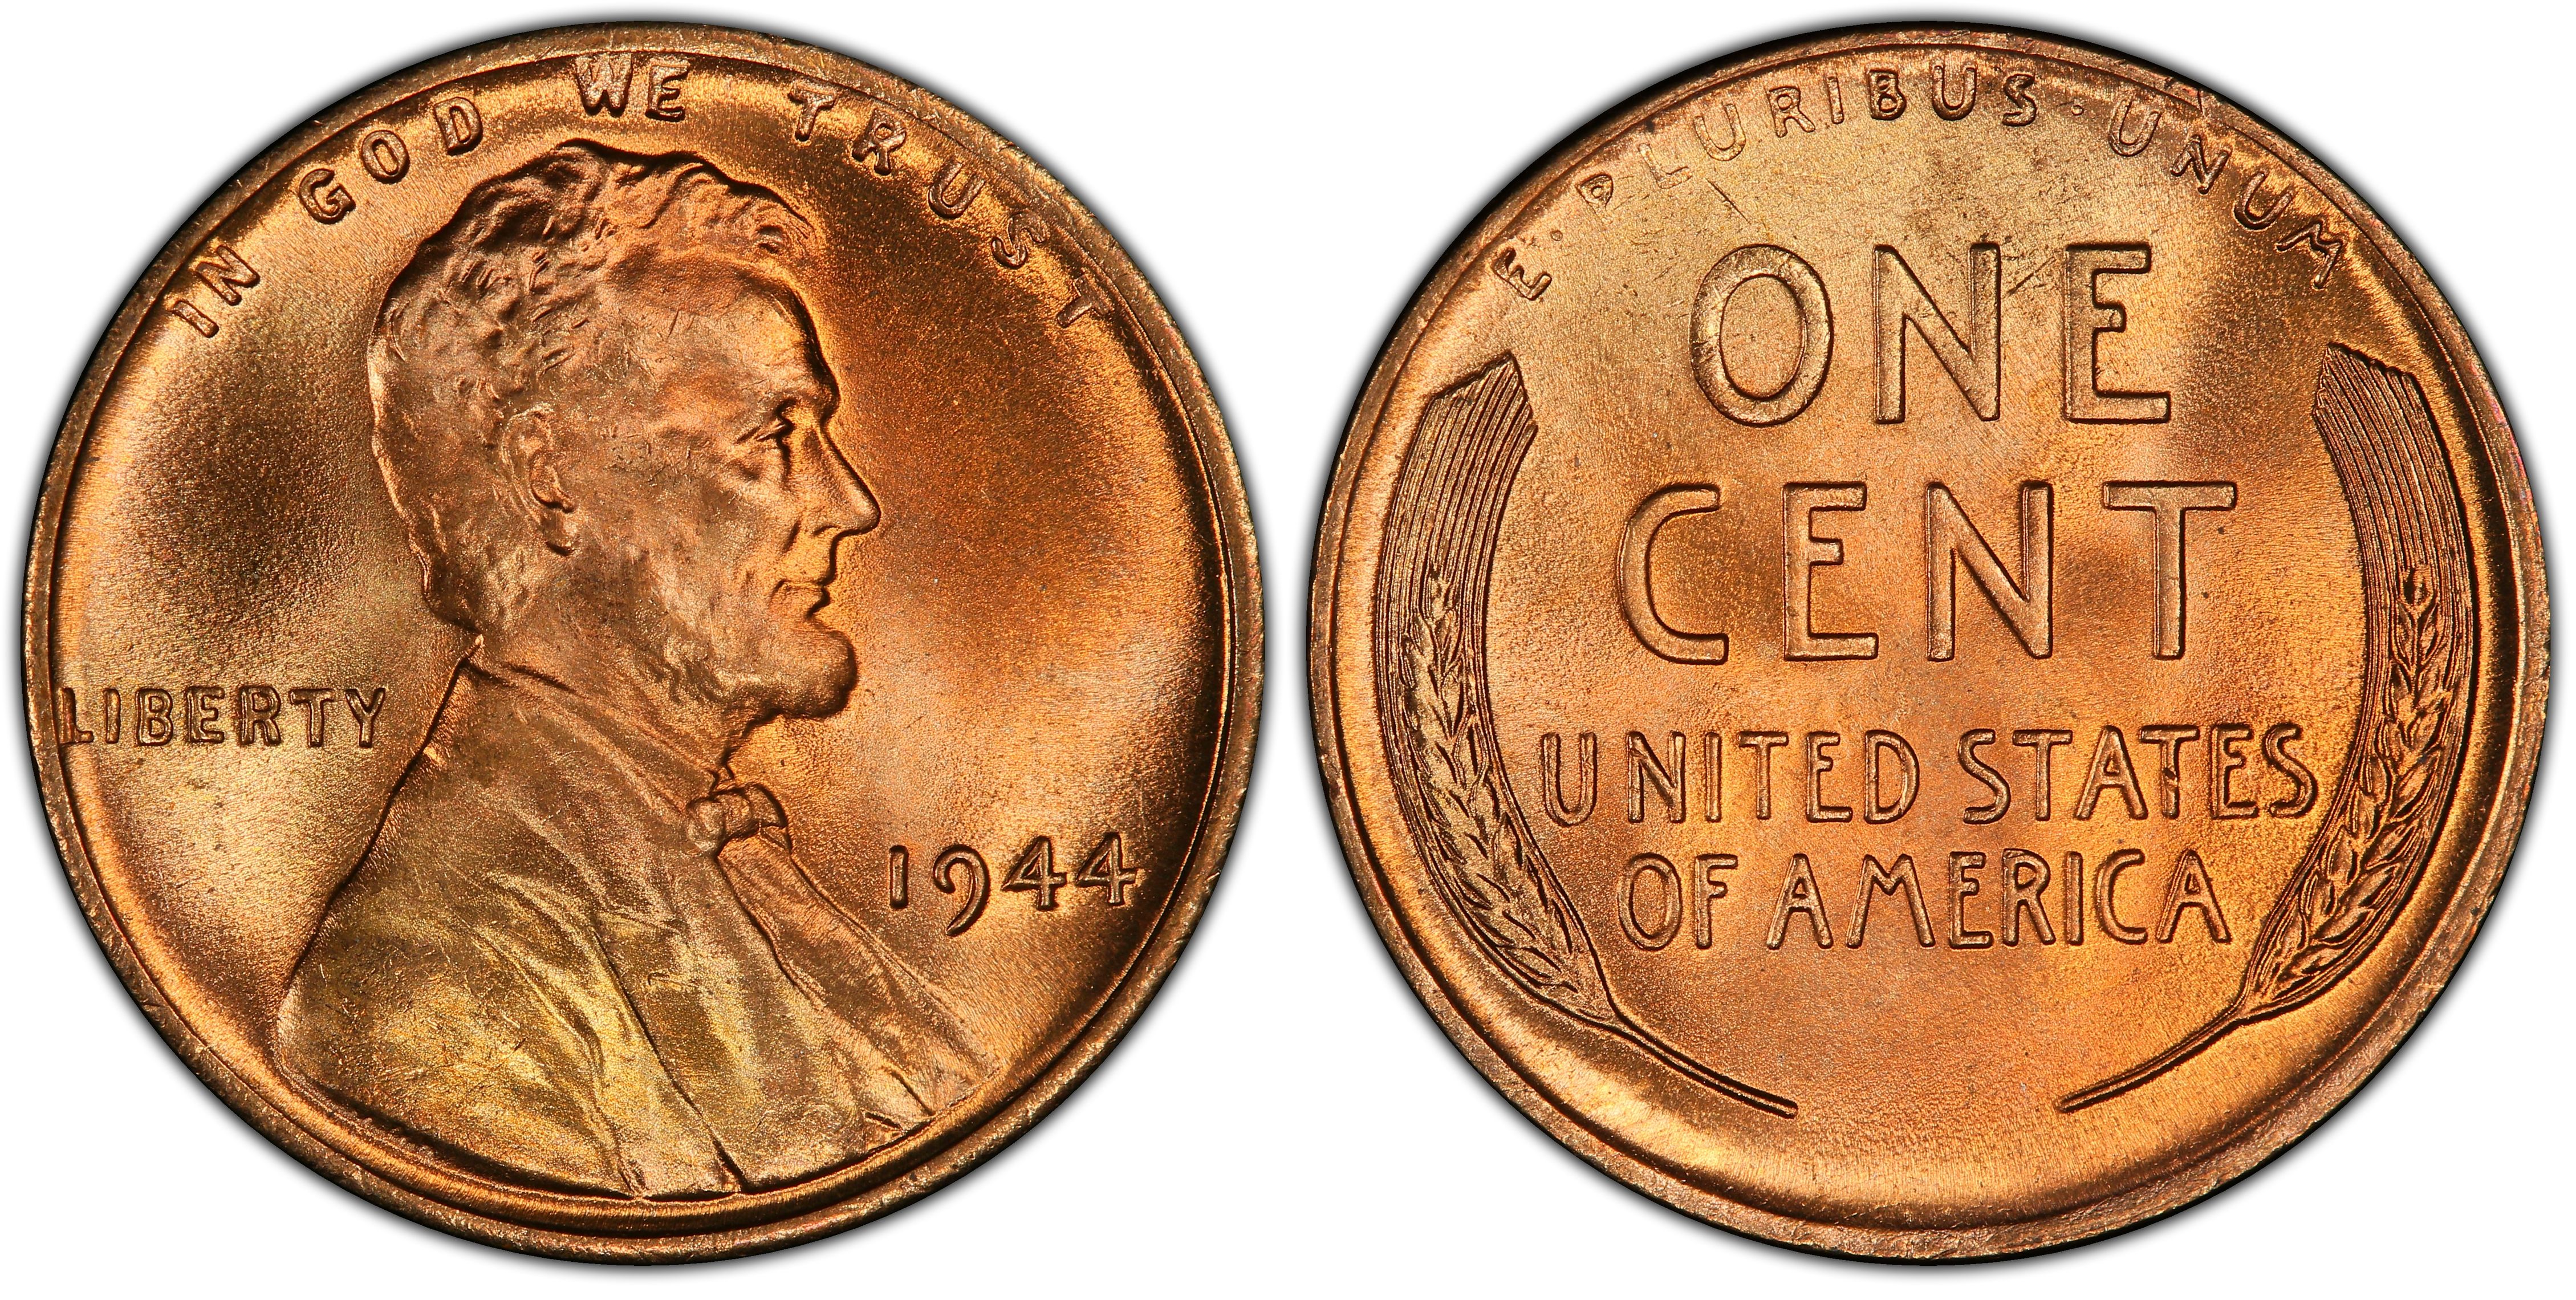 1944 1c Rd Regular Strike Lincoln Cent Wheat Reverse Pcgs Coinfacts,Frozen Pina Colada Recipe Frozen Pineapple